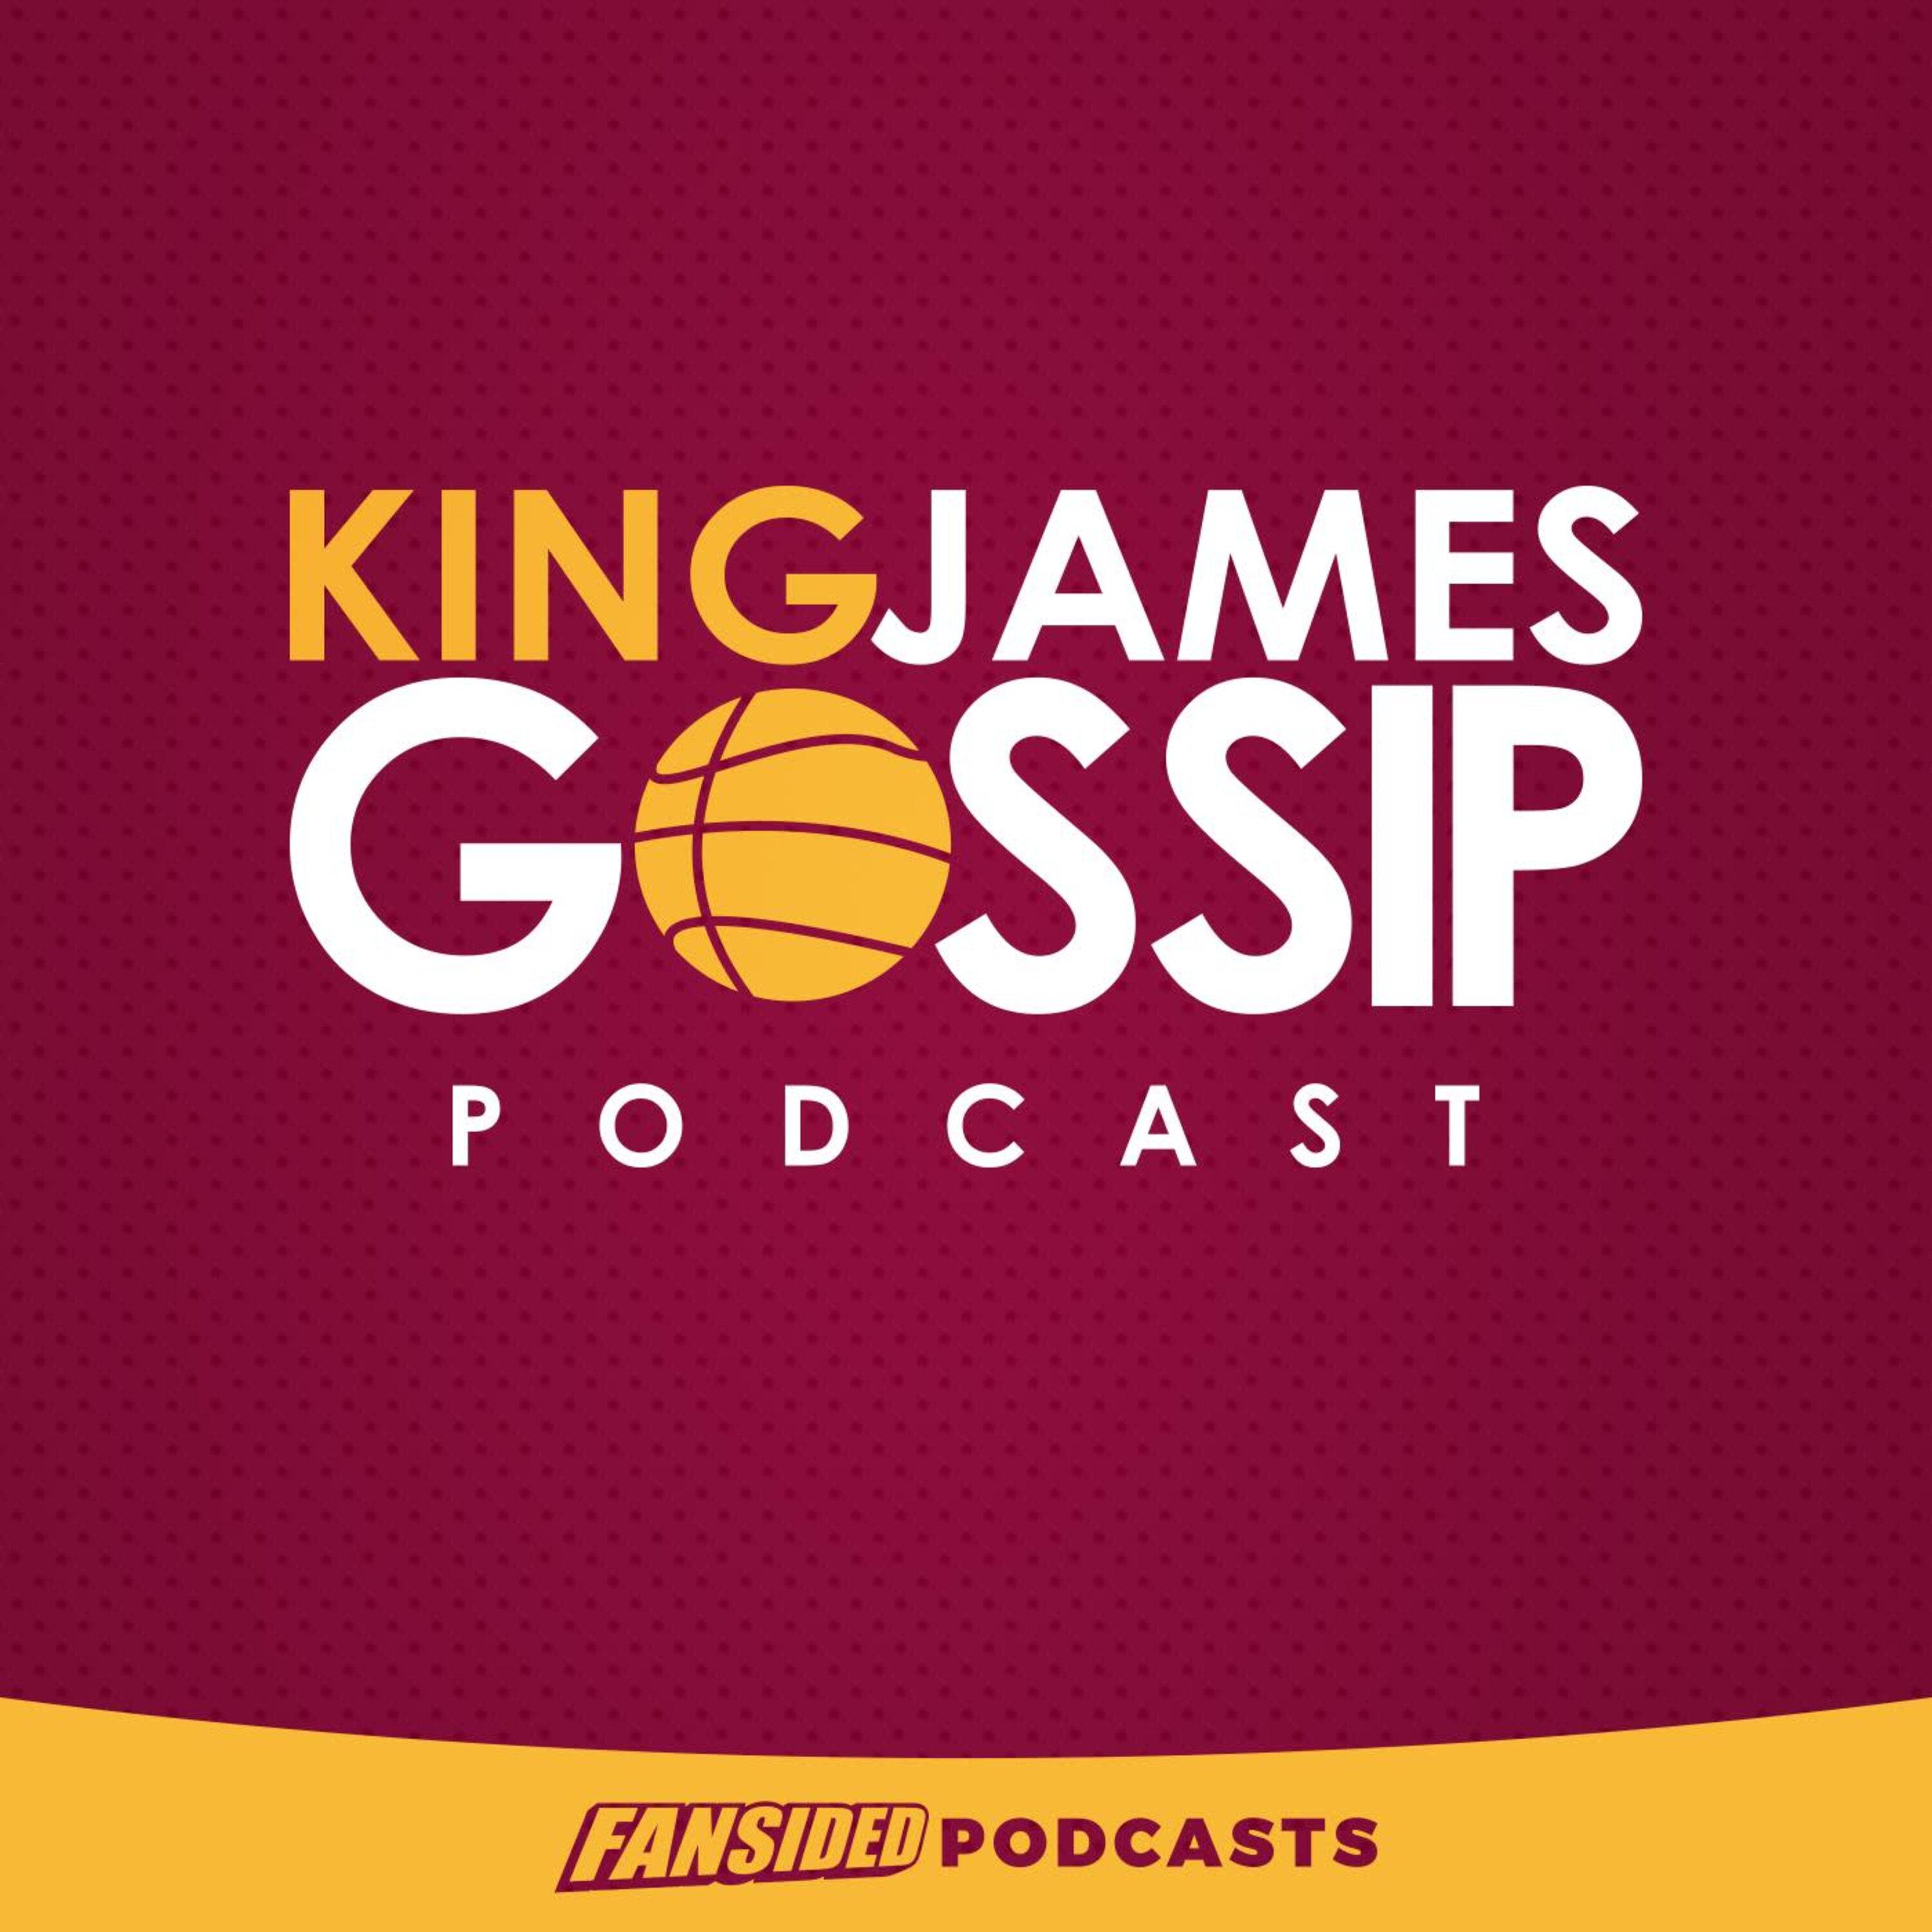 King James Gossip, a Cleveland Cavaliers Podcast